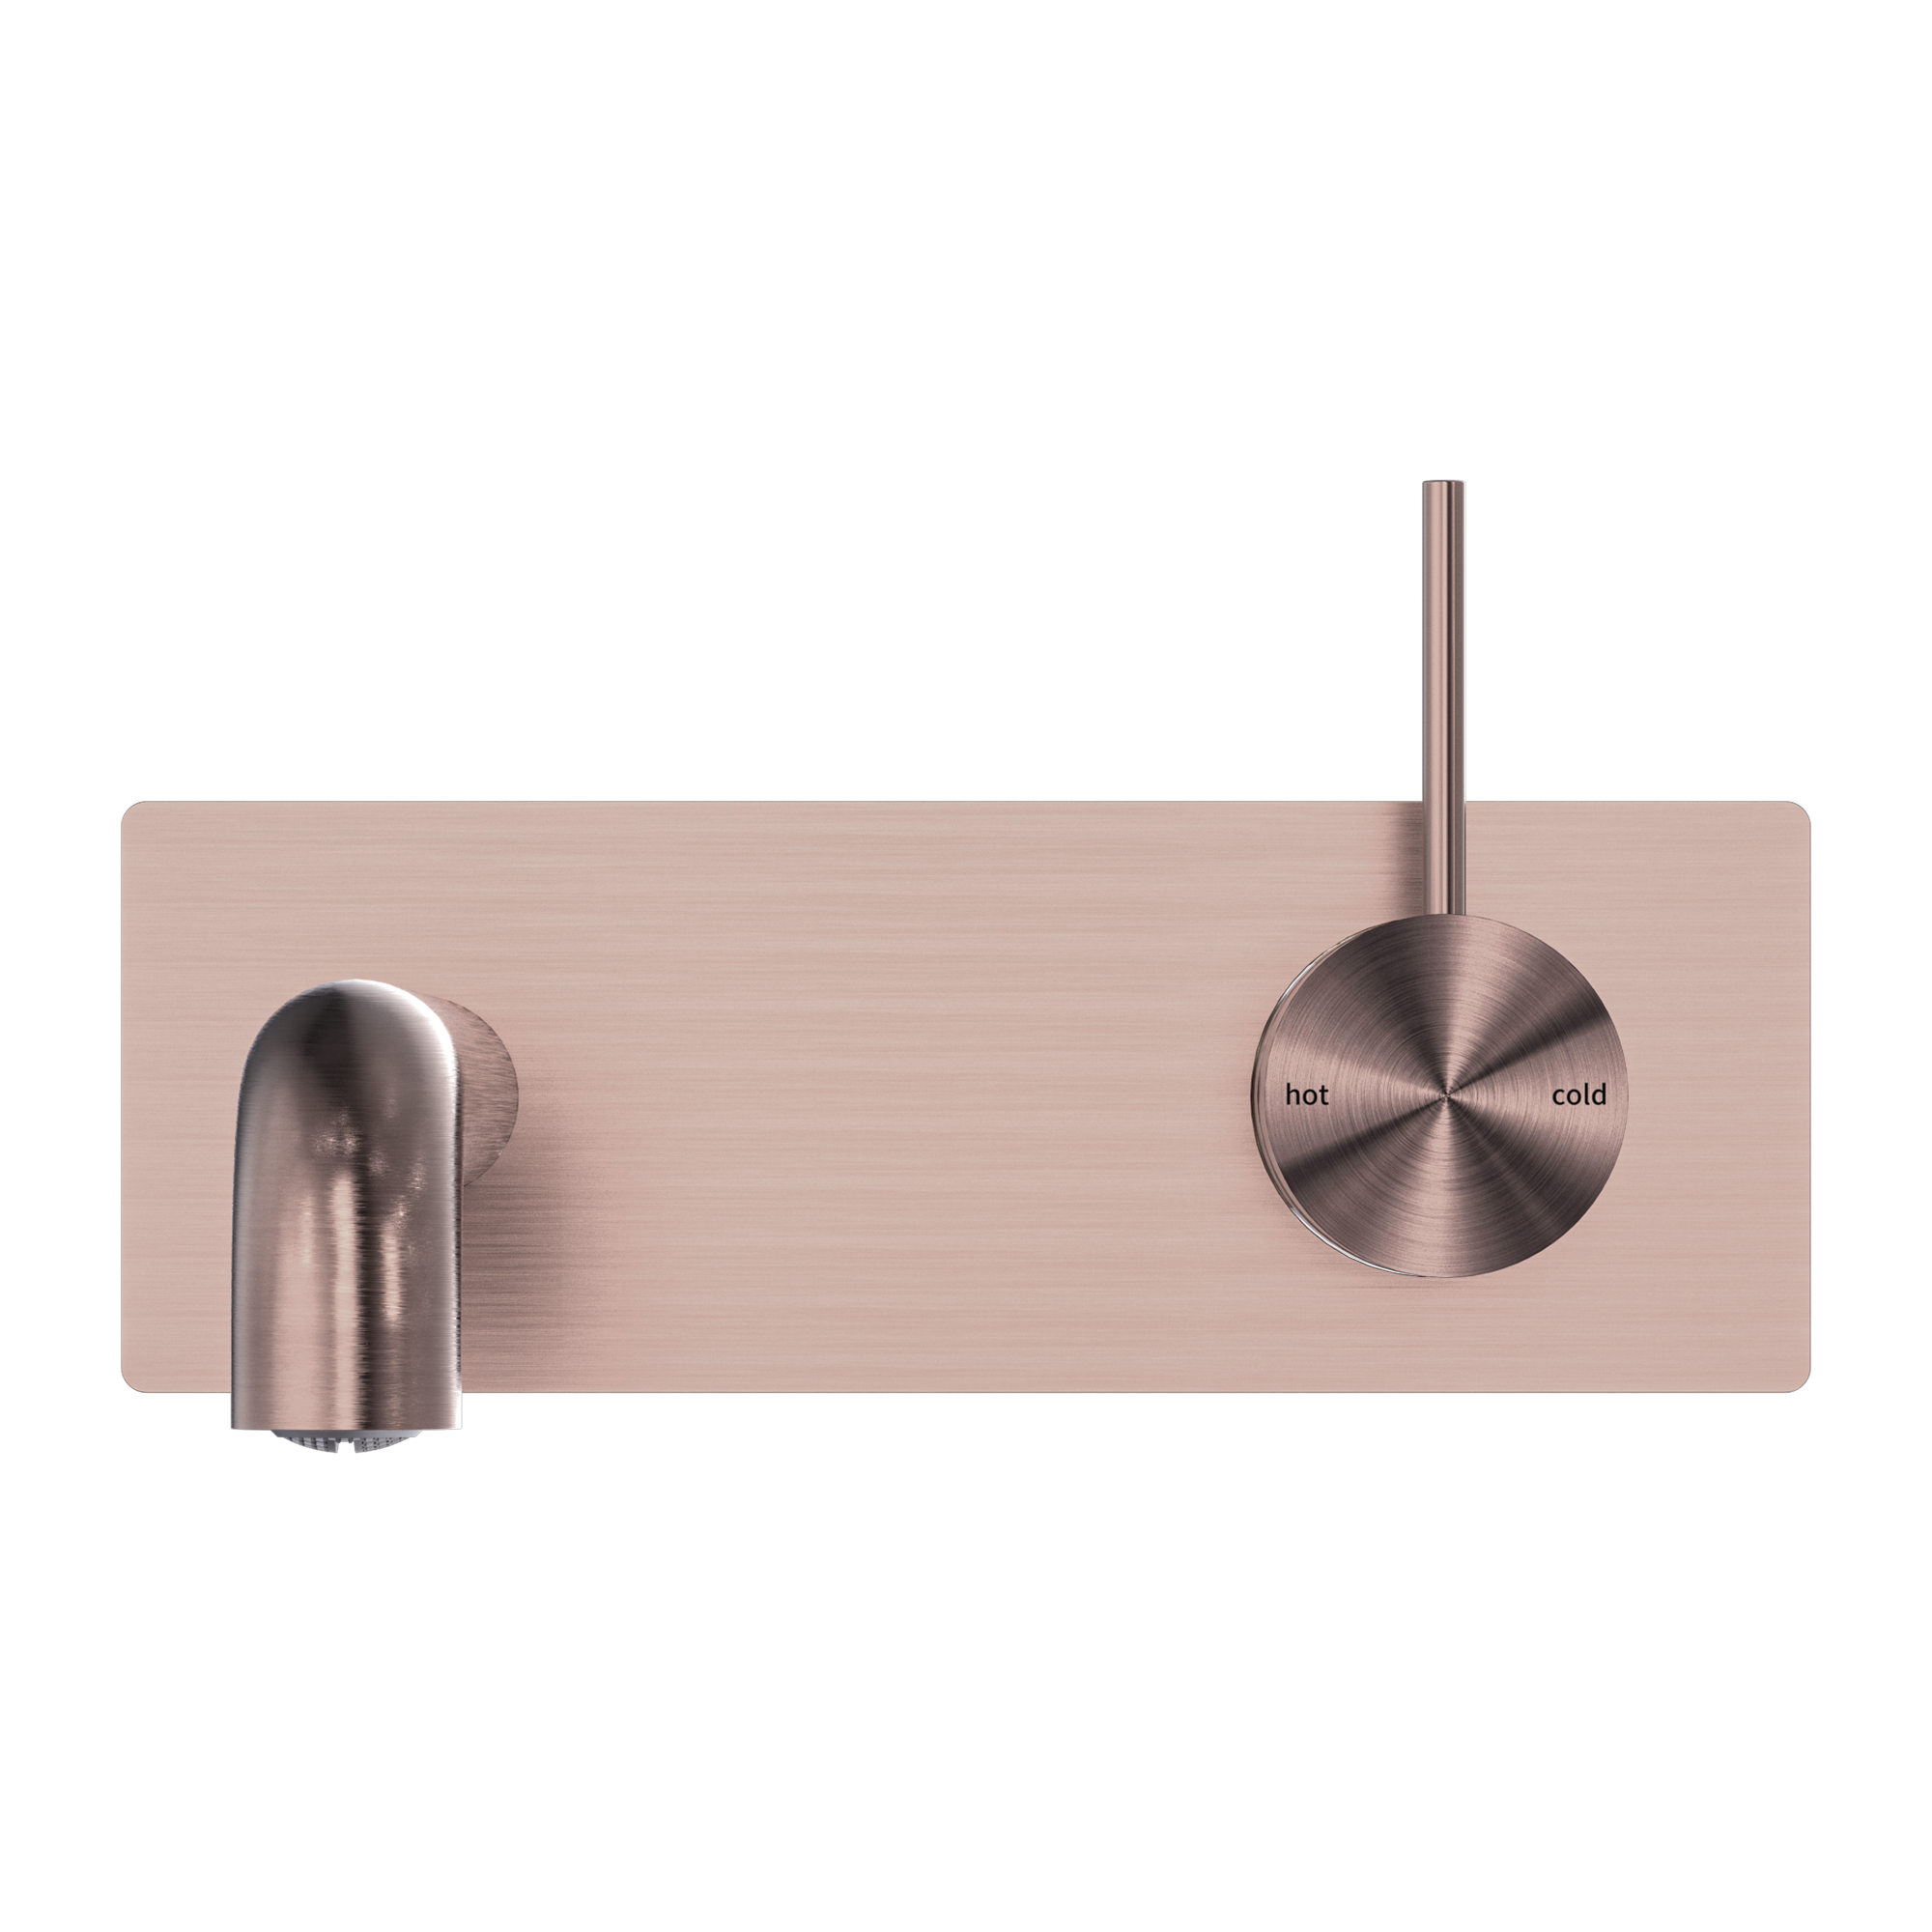 NERO MECCA WALL BASIN/ BATH MIXER HANDLE UP BRUSHED BRONZE (AVAILABLE IN 120MM,160MM,185MM, 230MM AND 260MM)